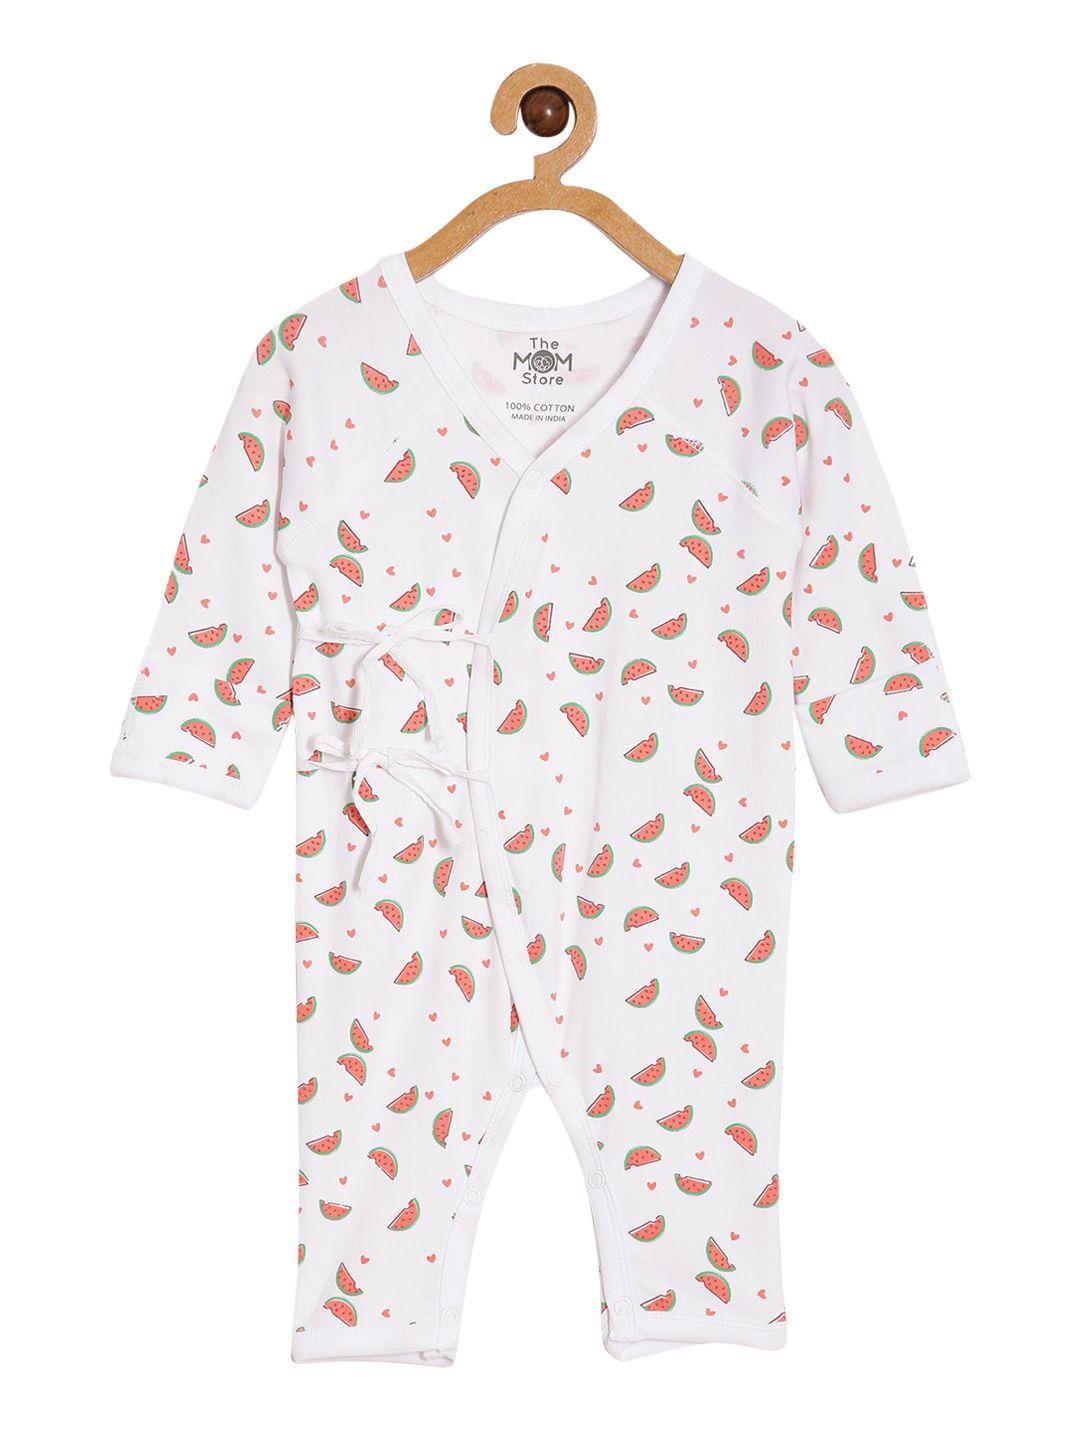 the mom store infants watermelon printed cotton romper